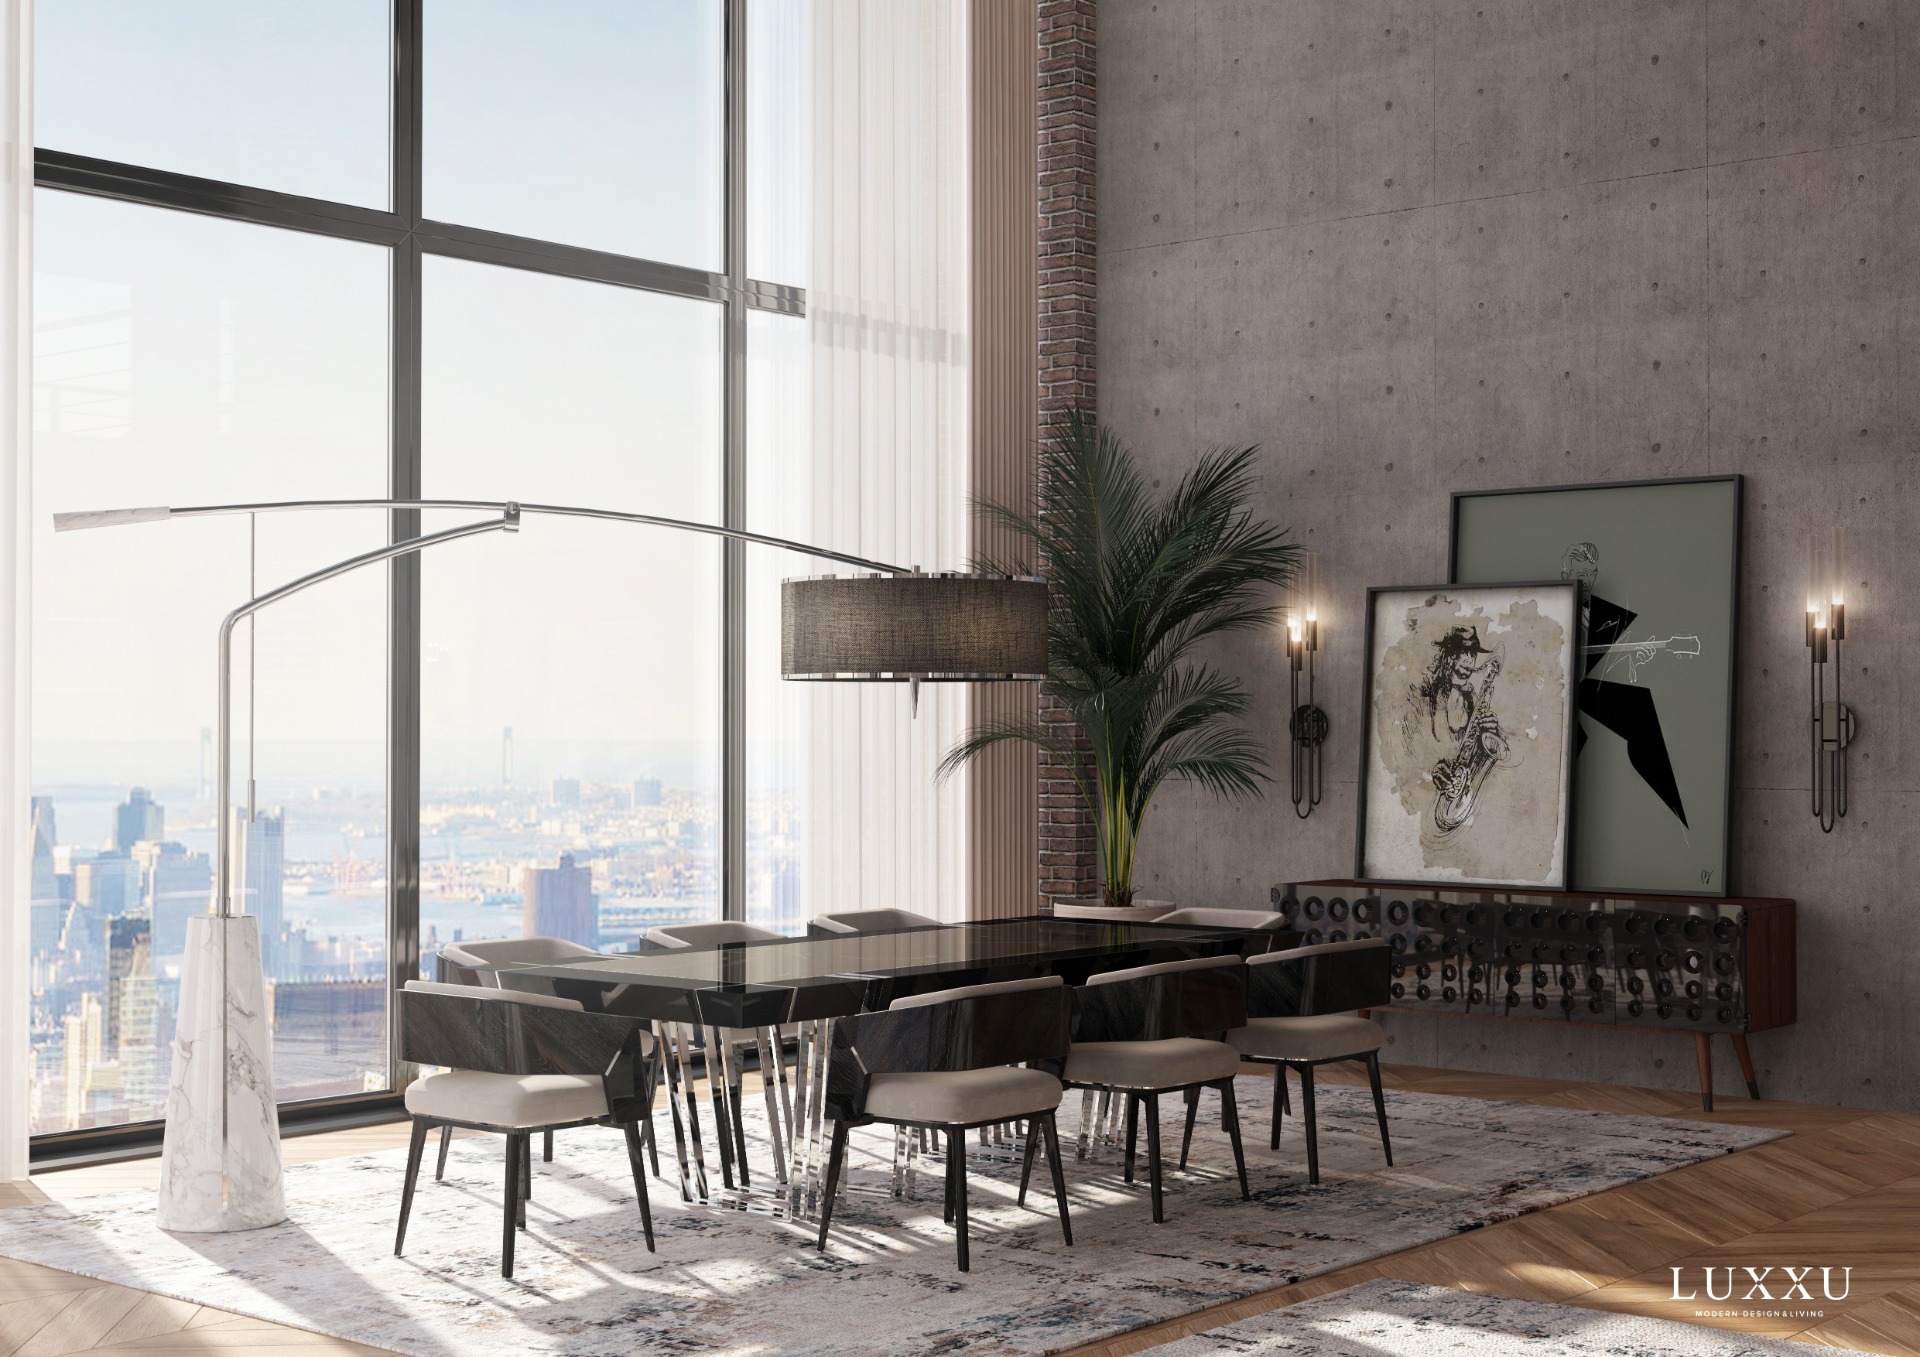 Discover How PullCast Make Part Of  Luxxu's New York City Loft